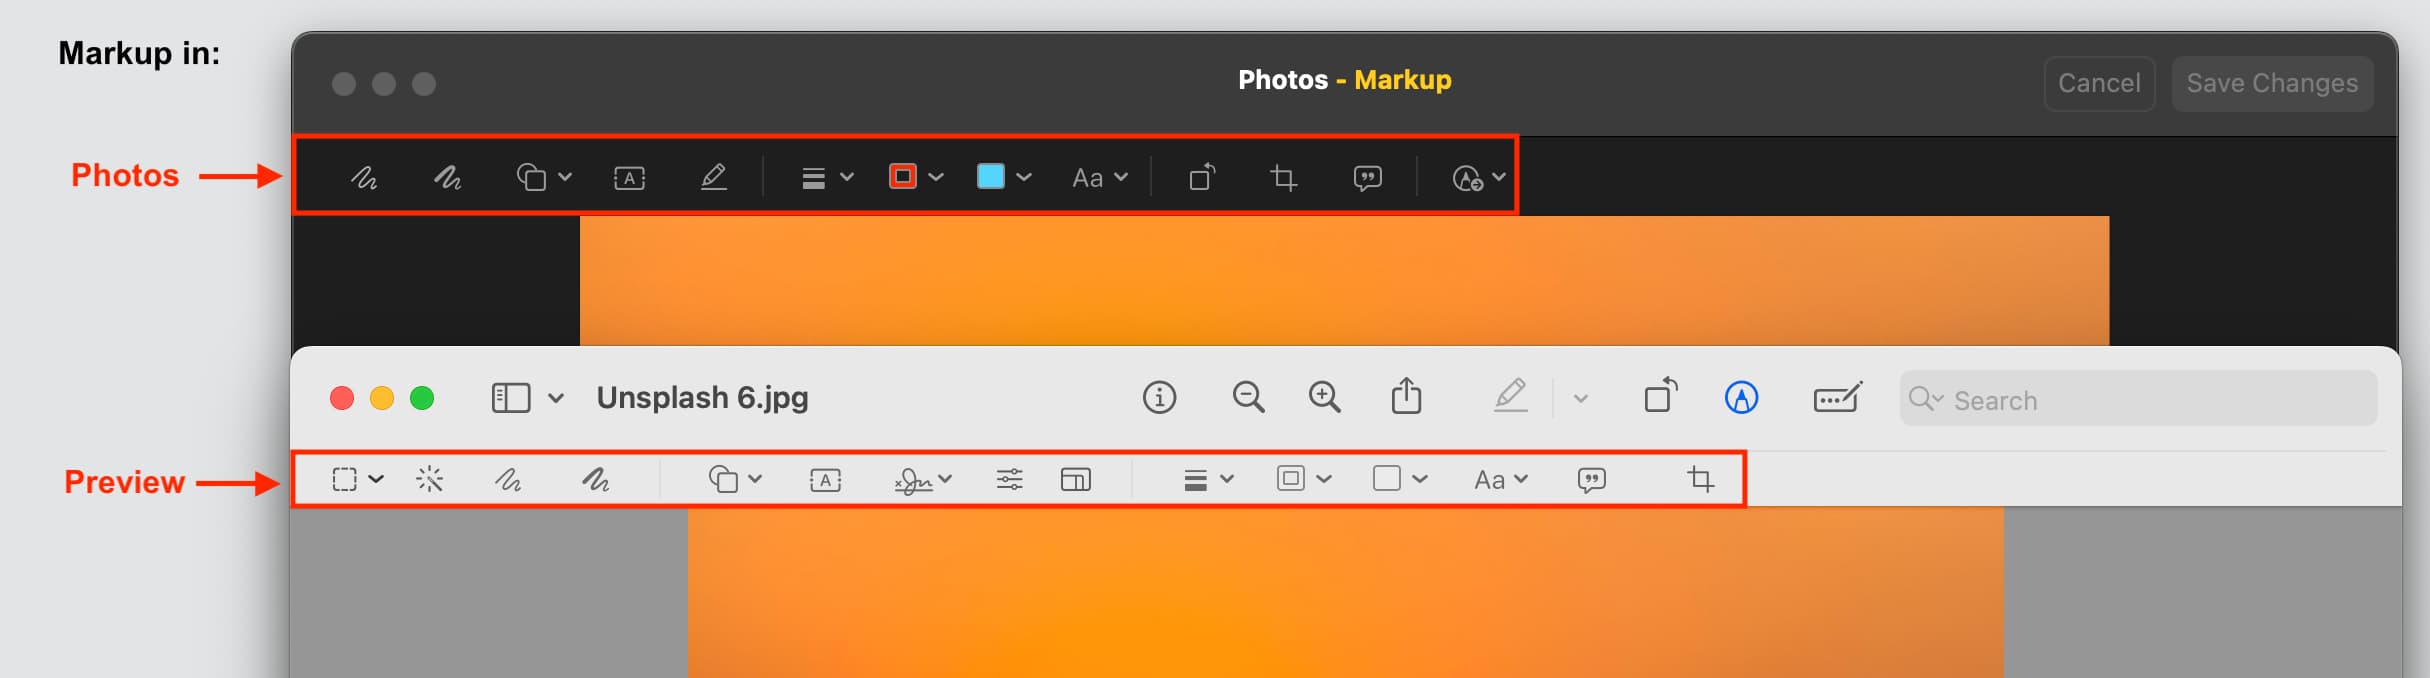 Markup tools in Photos and Preview on Mac